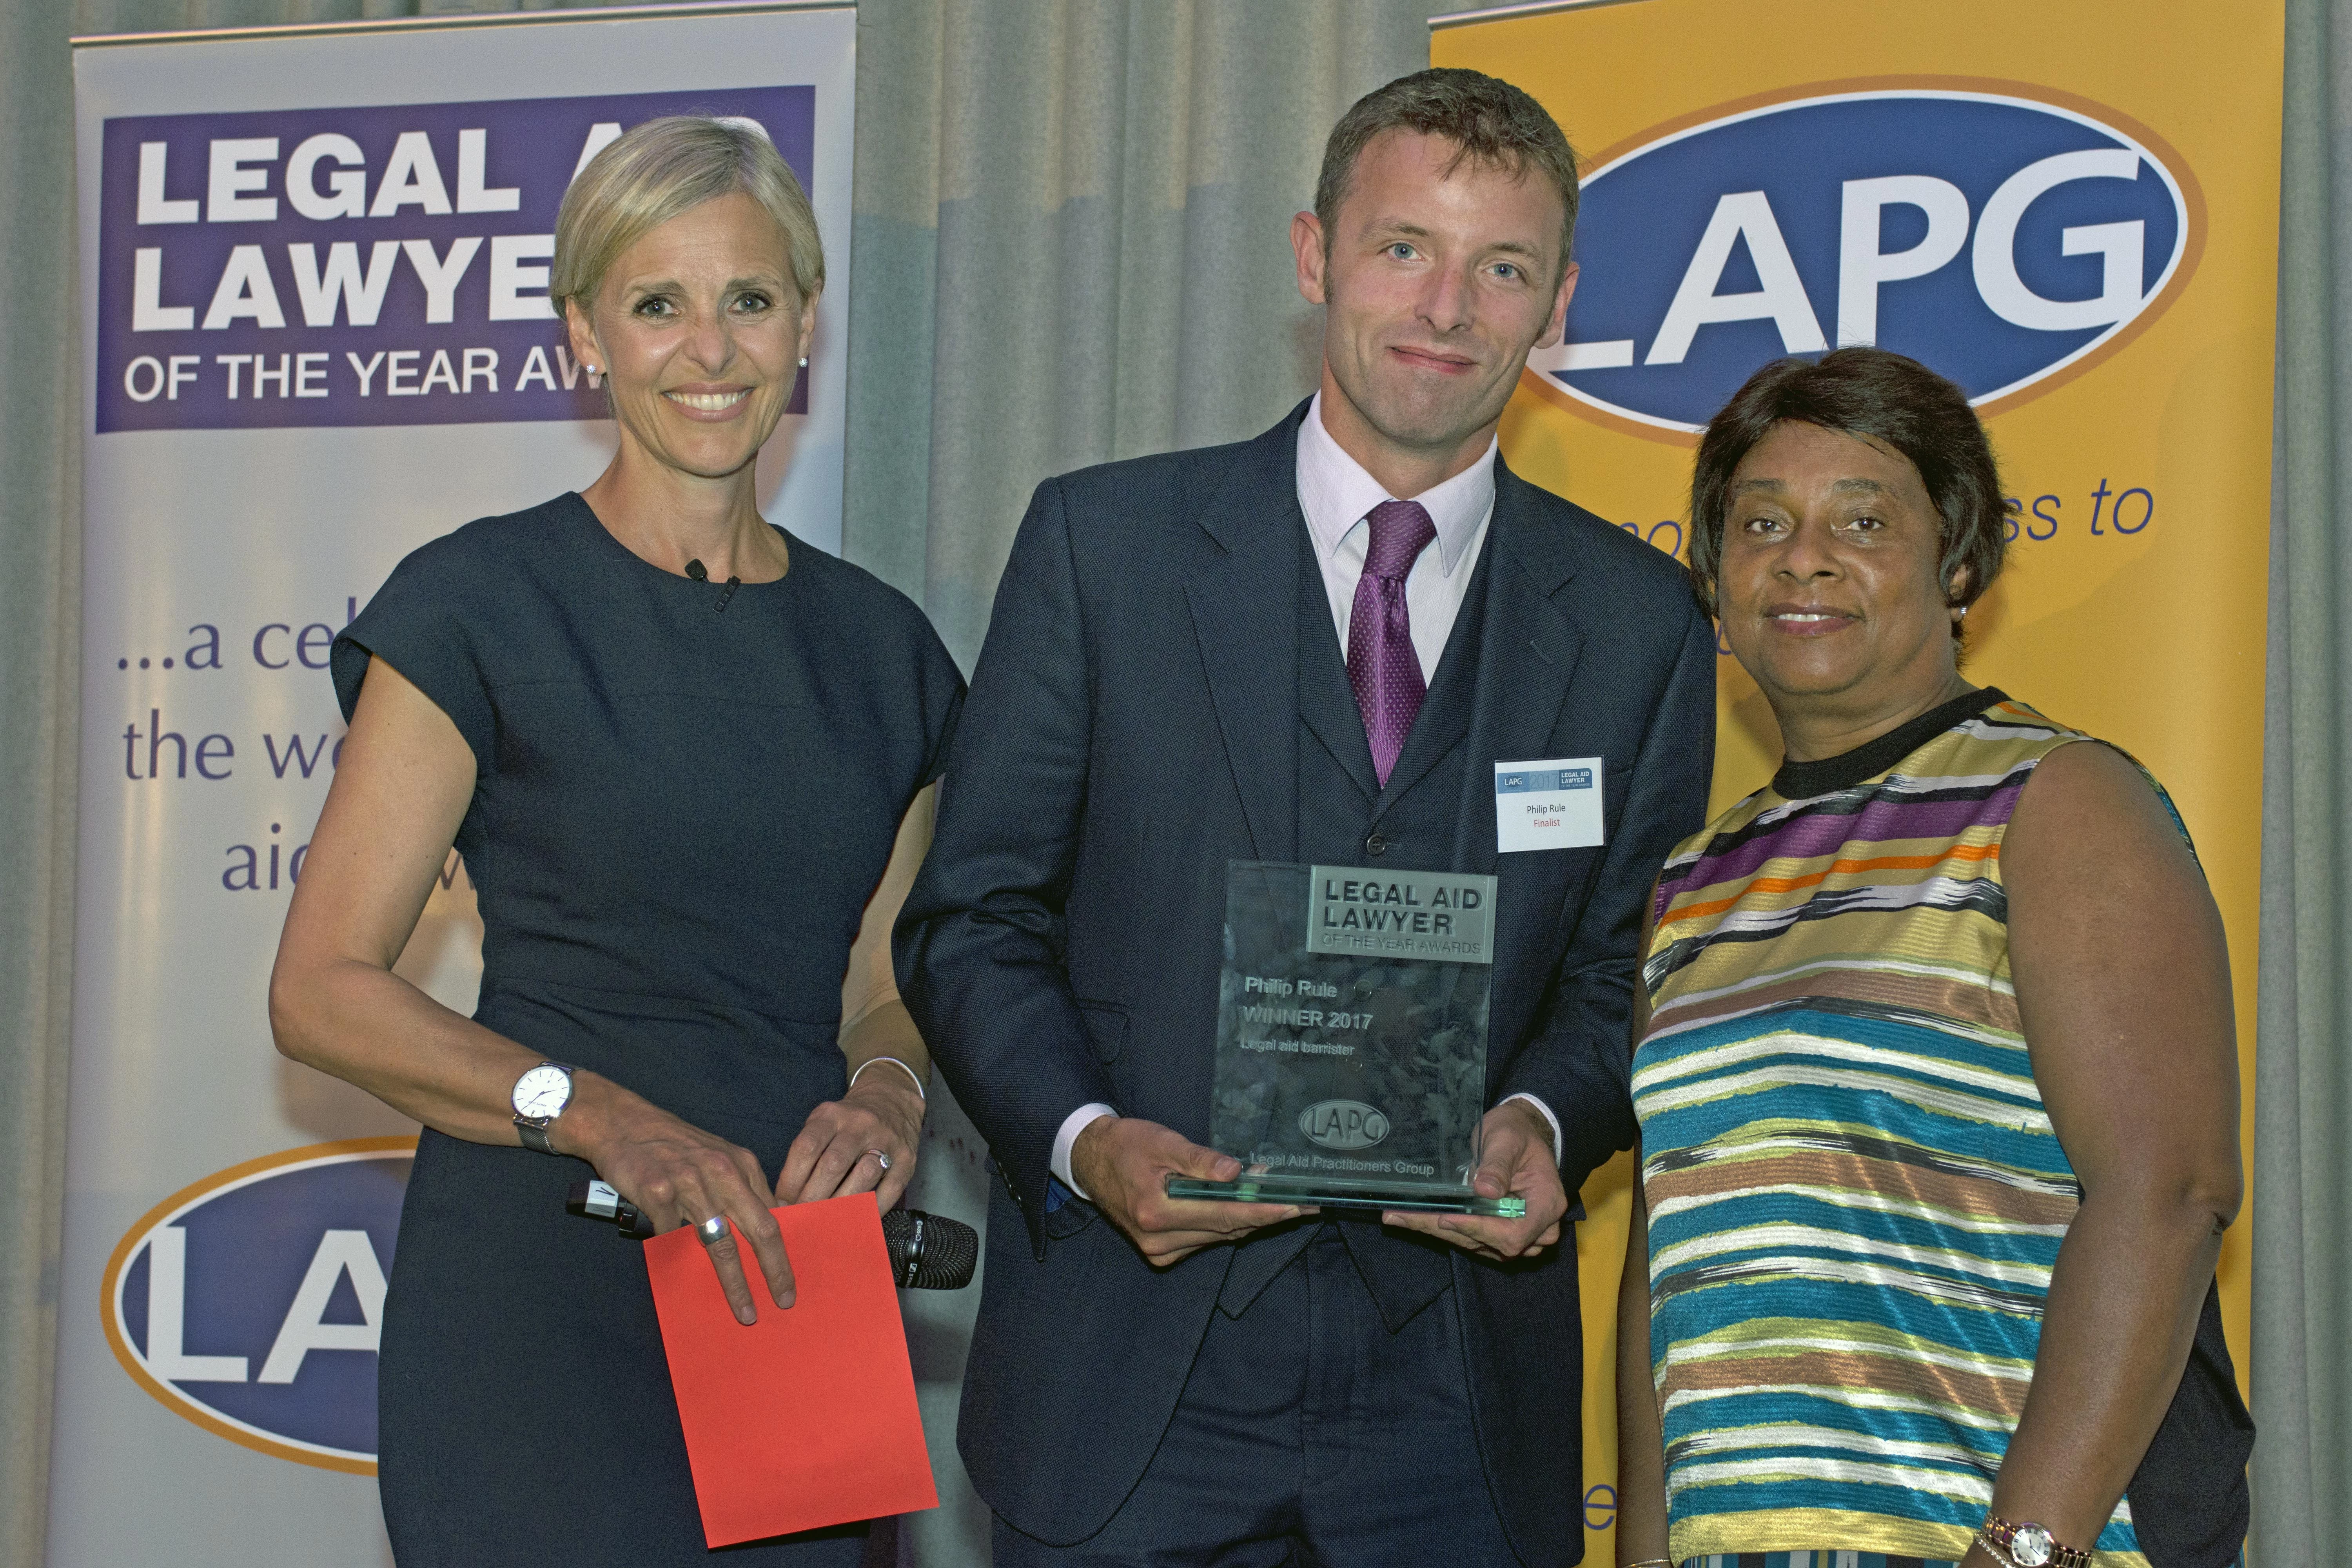 Philip Rule of No5 Barristers’ Chambers was named Legal Aid Barrister at the annual Legal Aid Lawyer of the Year Awards and is pictured (centre) with Anna Jones of Sky News (left) and Baroness Doreen Lawrence.